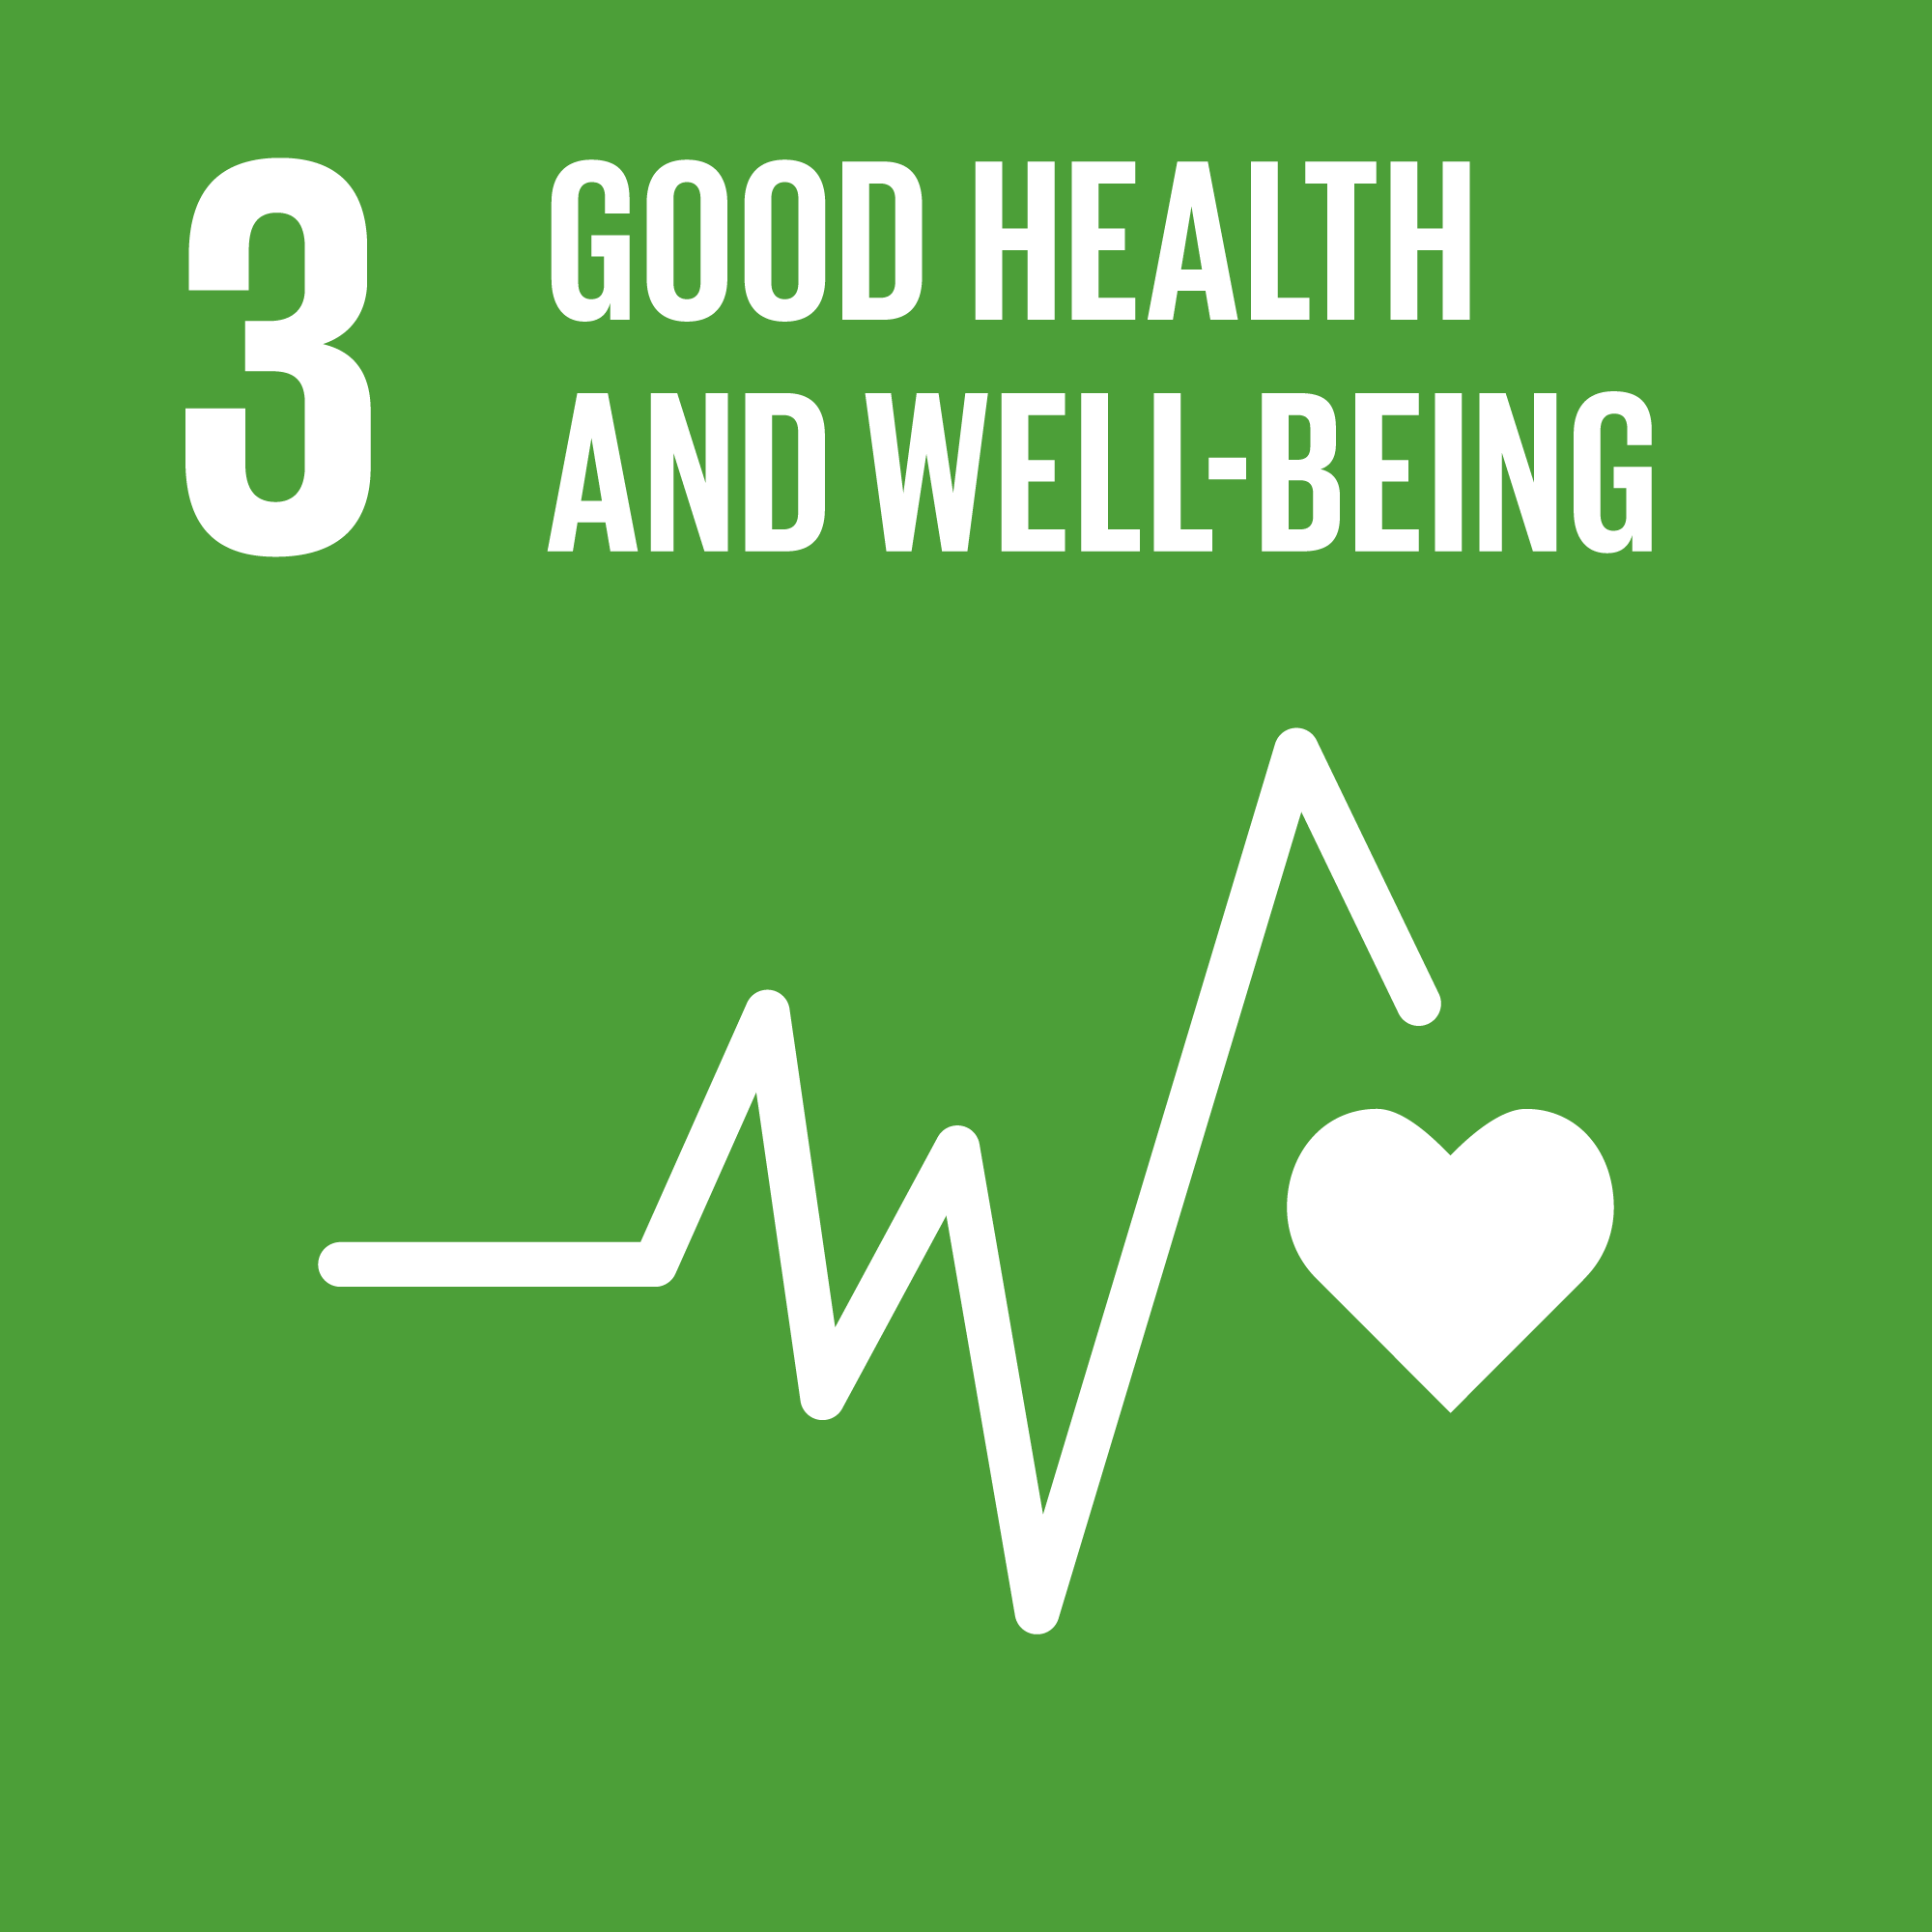 Icon of UN Social Development Goal (SDG) - Good Health and Well-Being